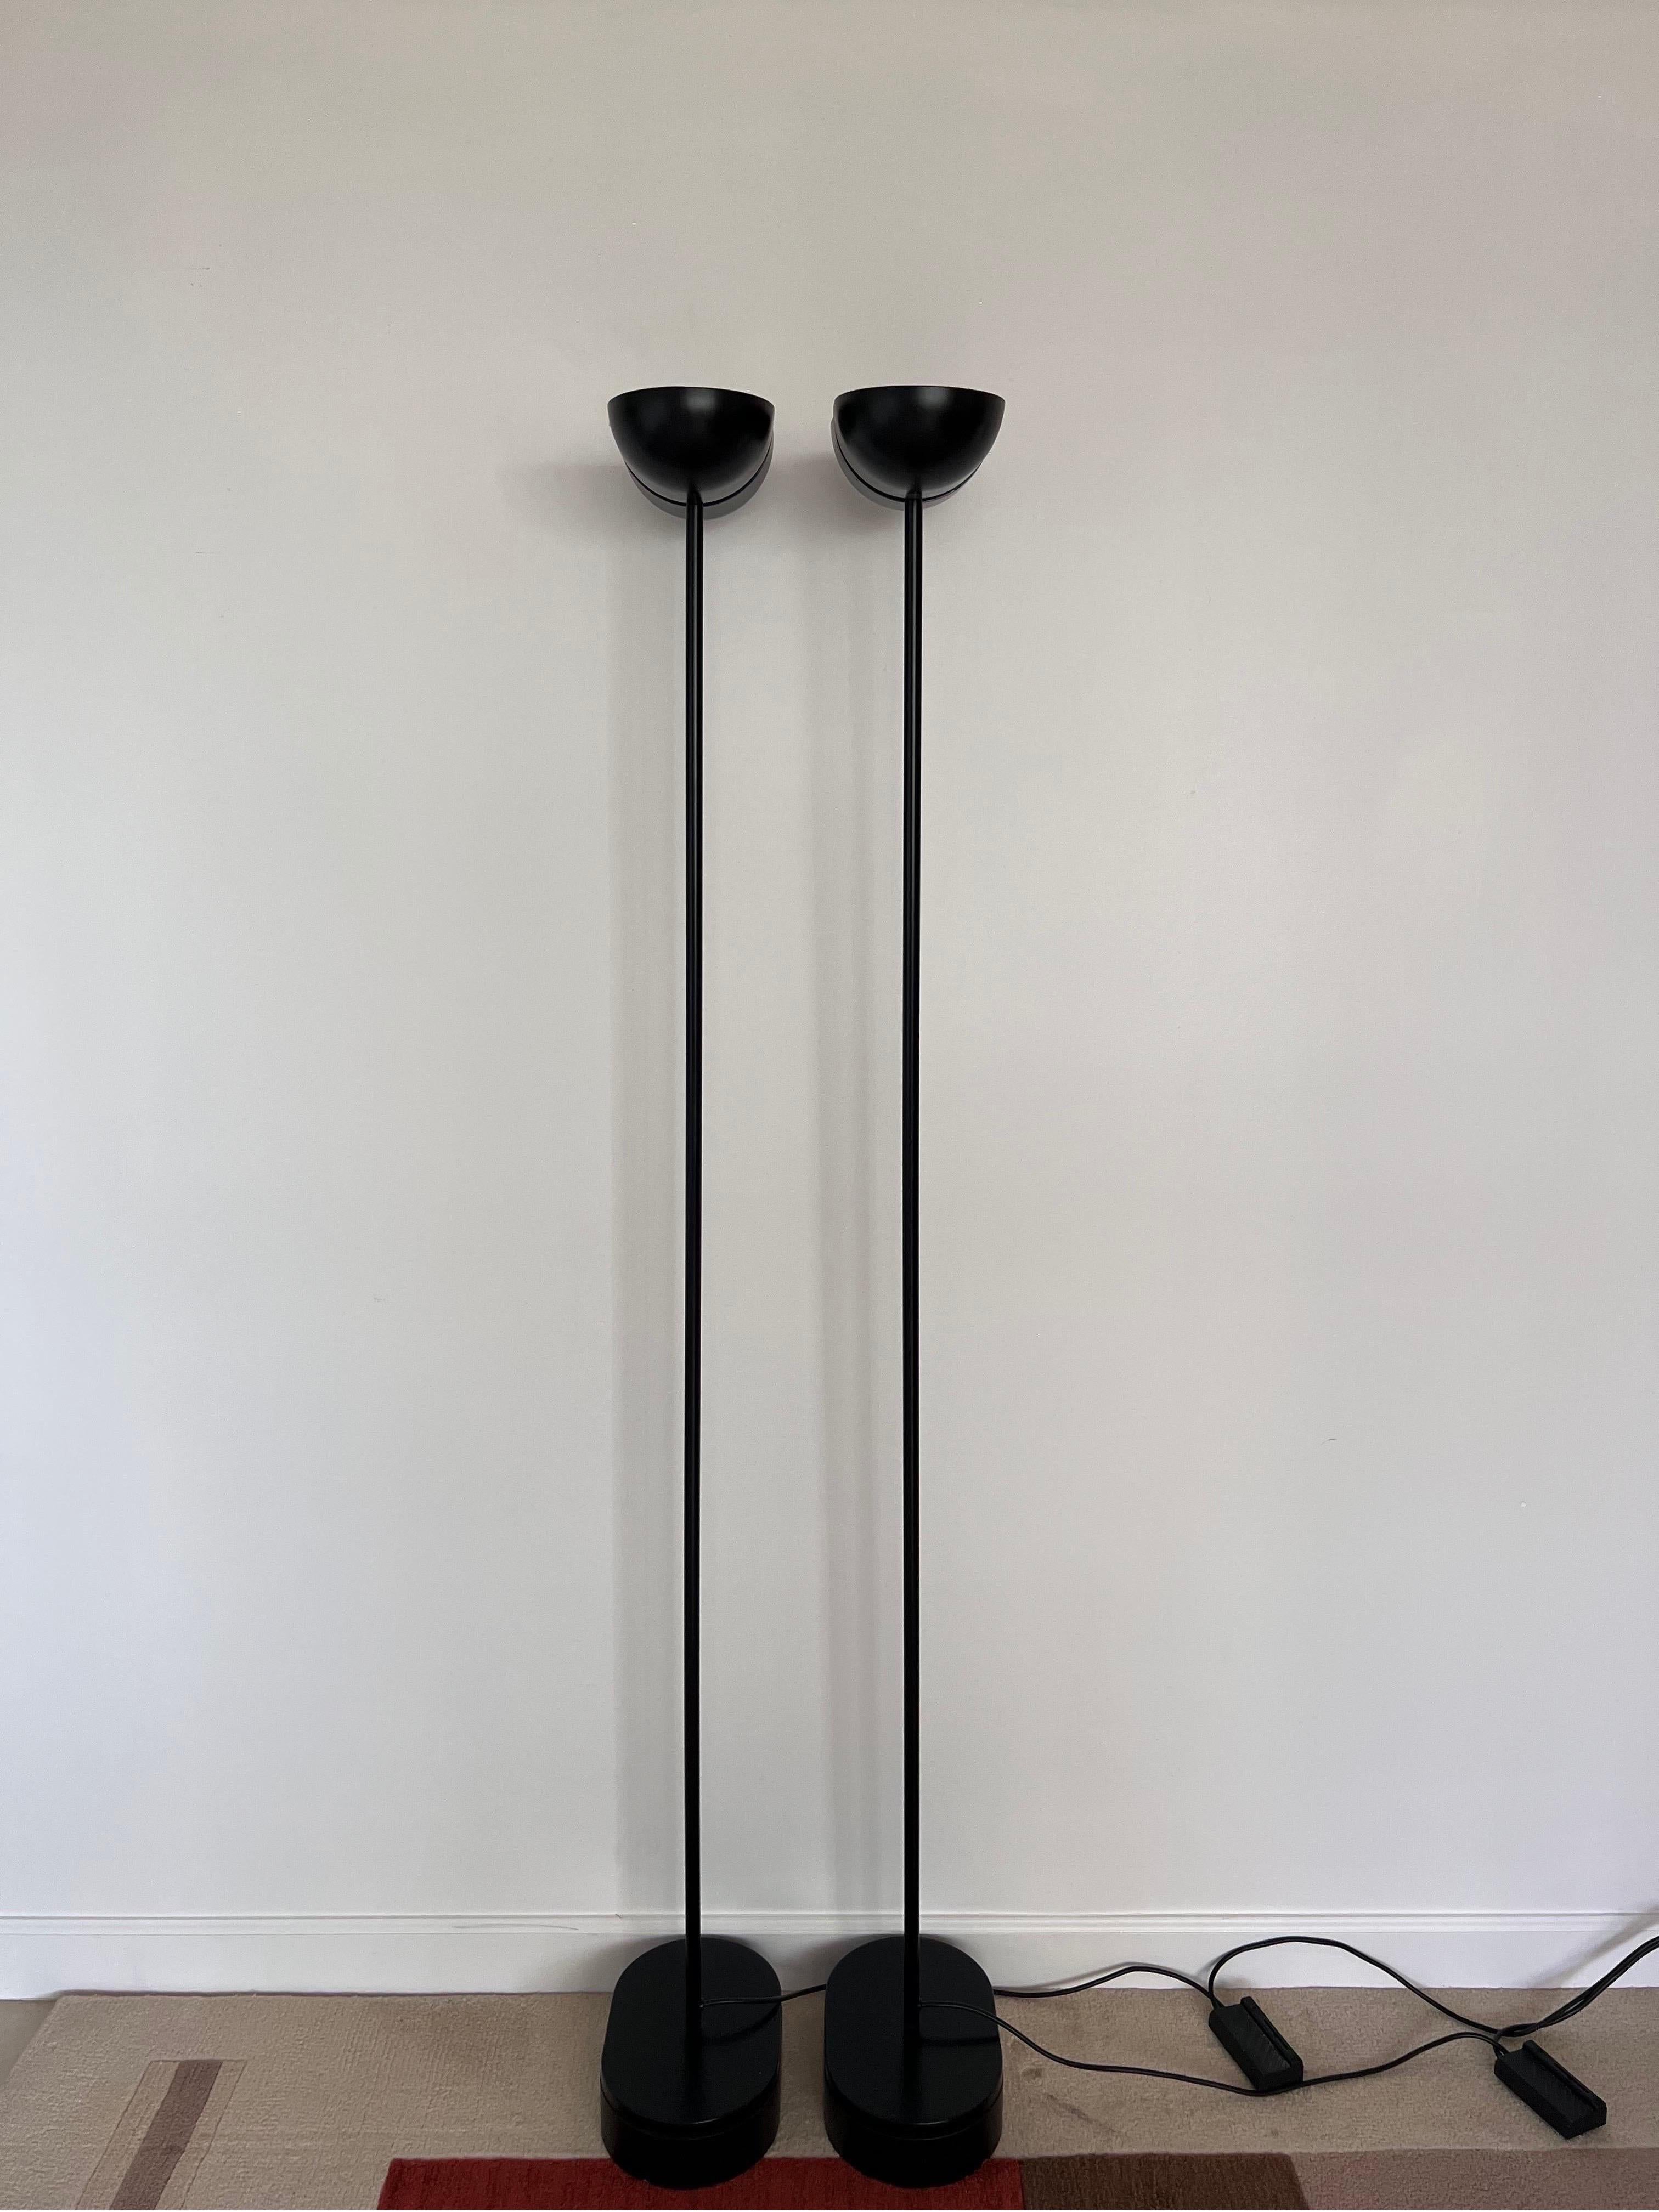 Unknown Postmodern Black Torchiere Floor Lamps with Adjustable Heads, 1980s, a Pair